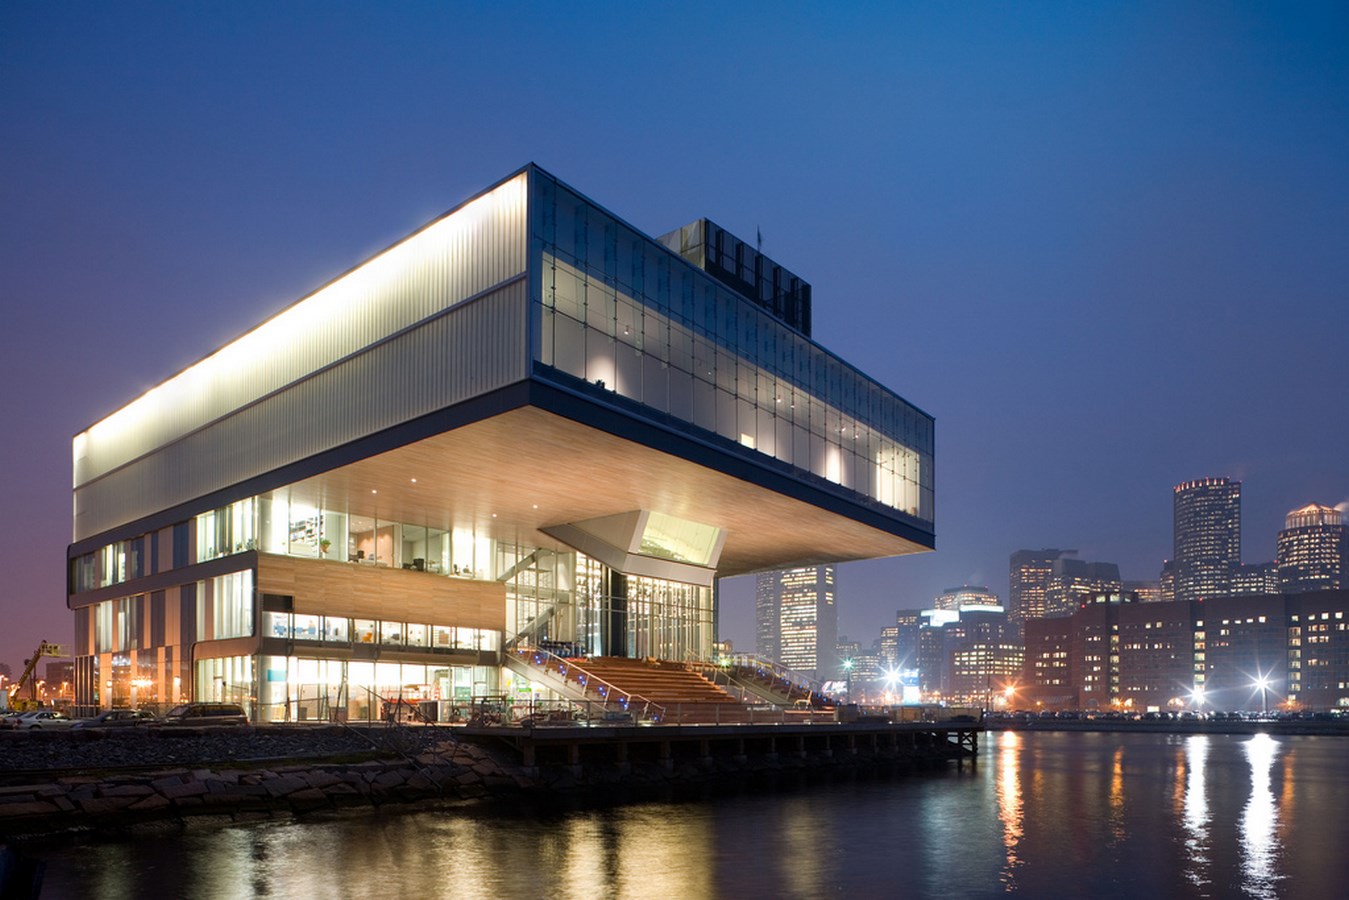 25 Most Iconic Structures In Boston - INSTITUTE OF CONTEMPORARY ART